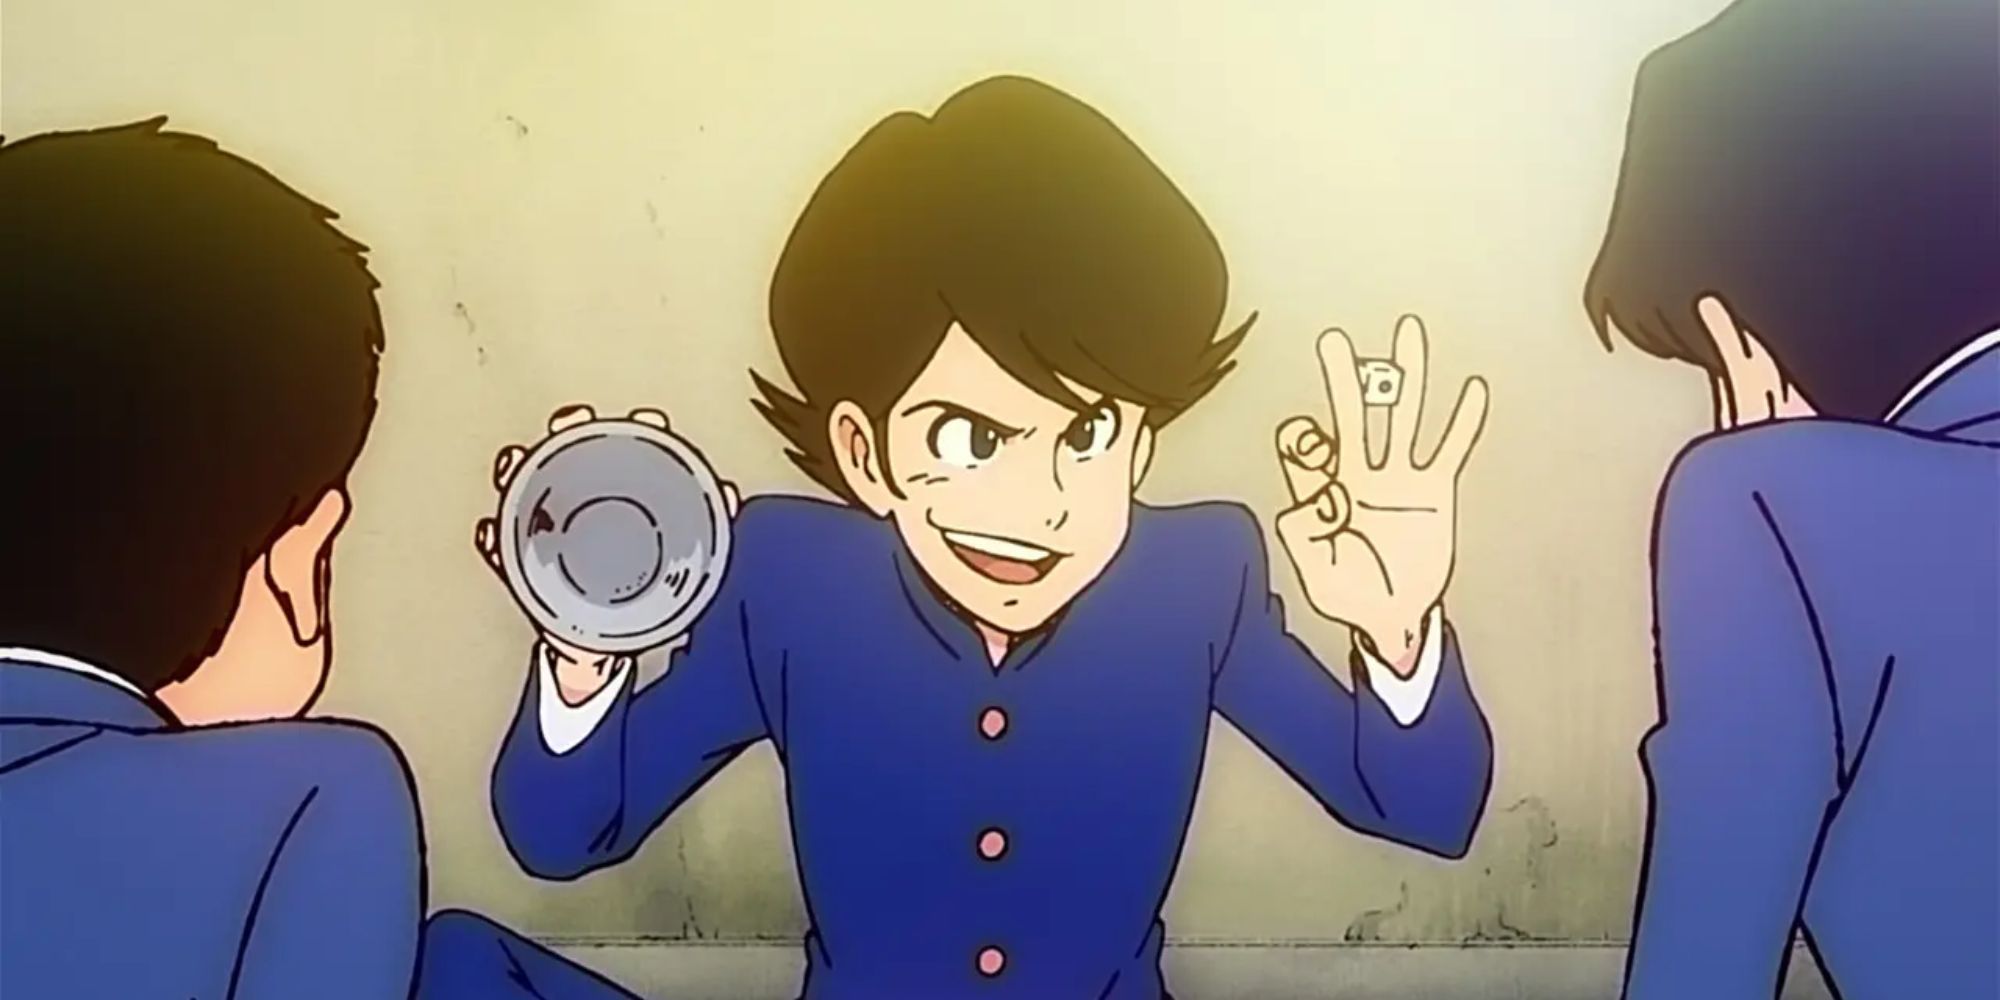 Lupin ZERO Lupin III's Young Protagonist Playing with his school mates